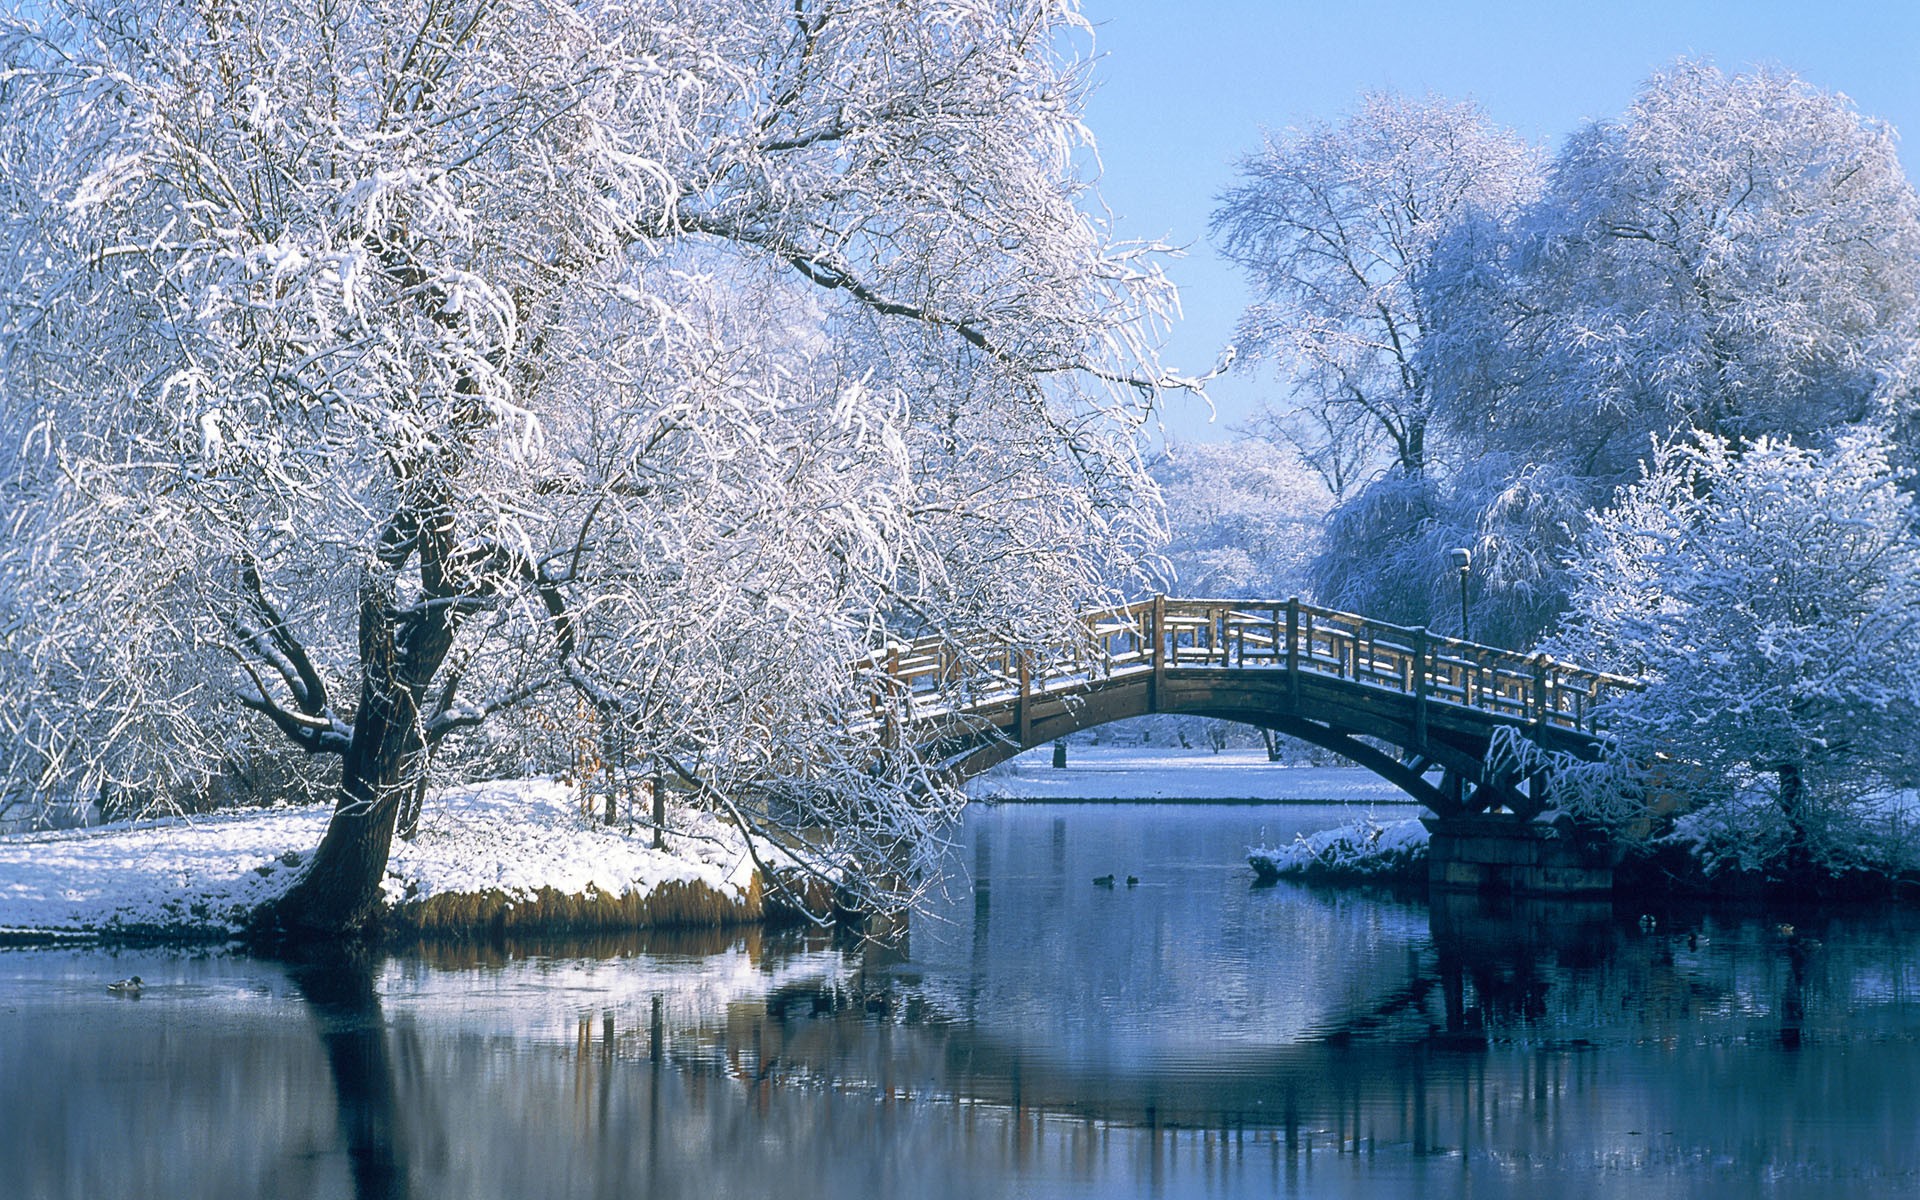 Winter Background Images Download Free Awesome High Resolution Wallpapers For Desktop